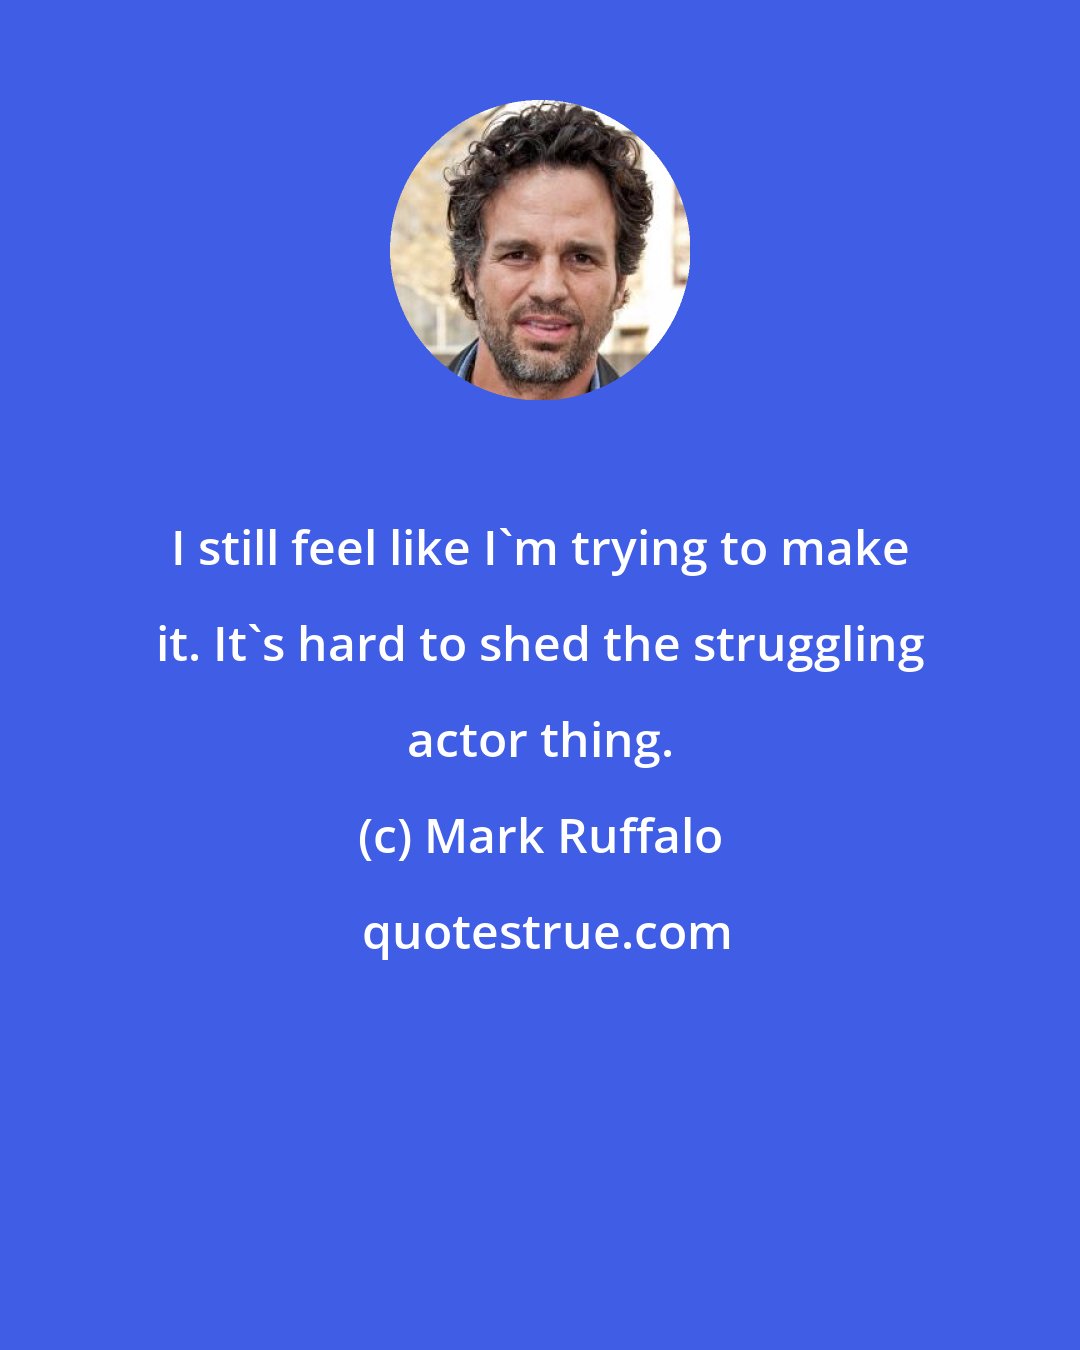 Mark Ruffalo: I still feel like I'm trying to make it. It's hard to shed the struggling actor thing.